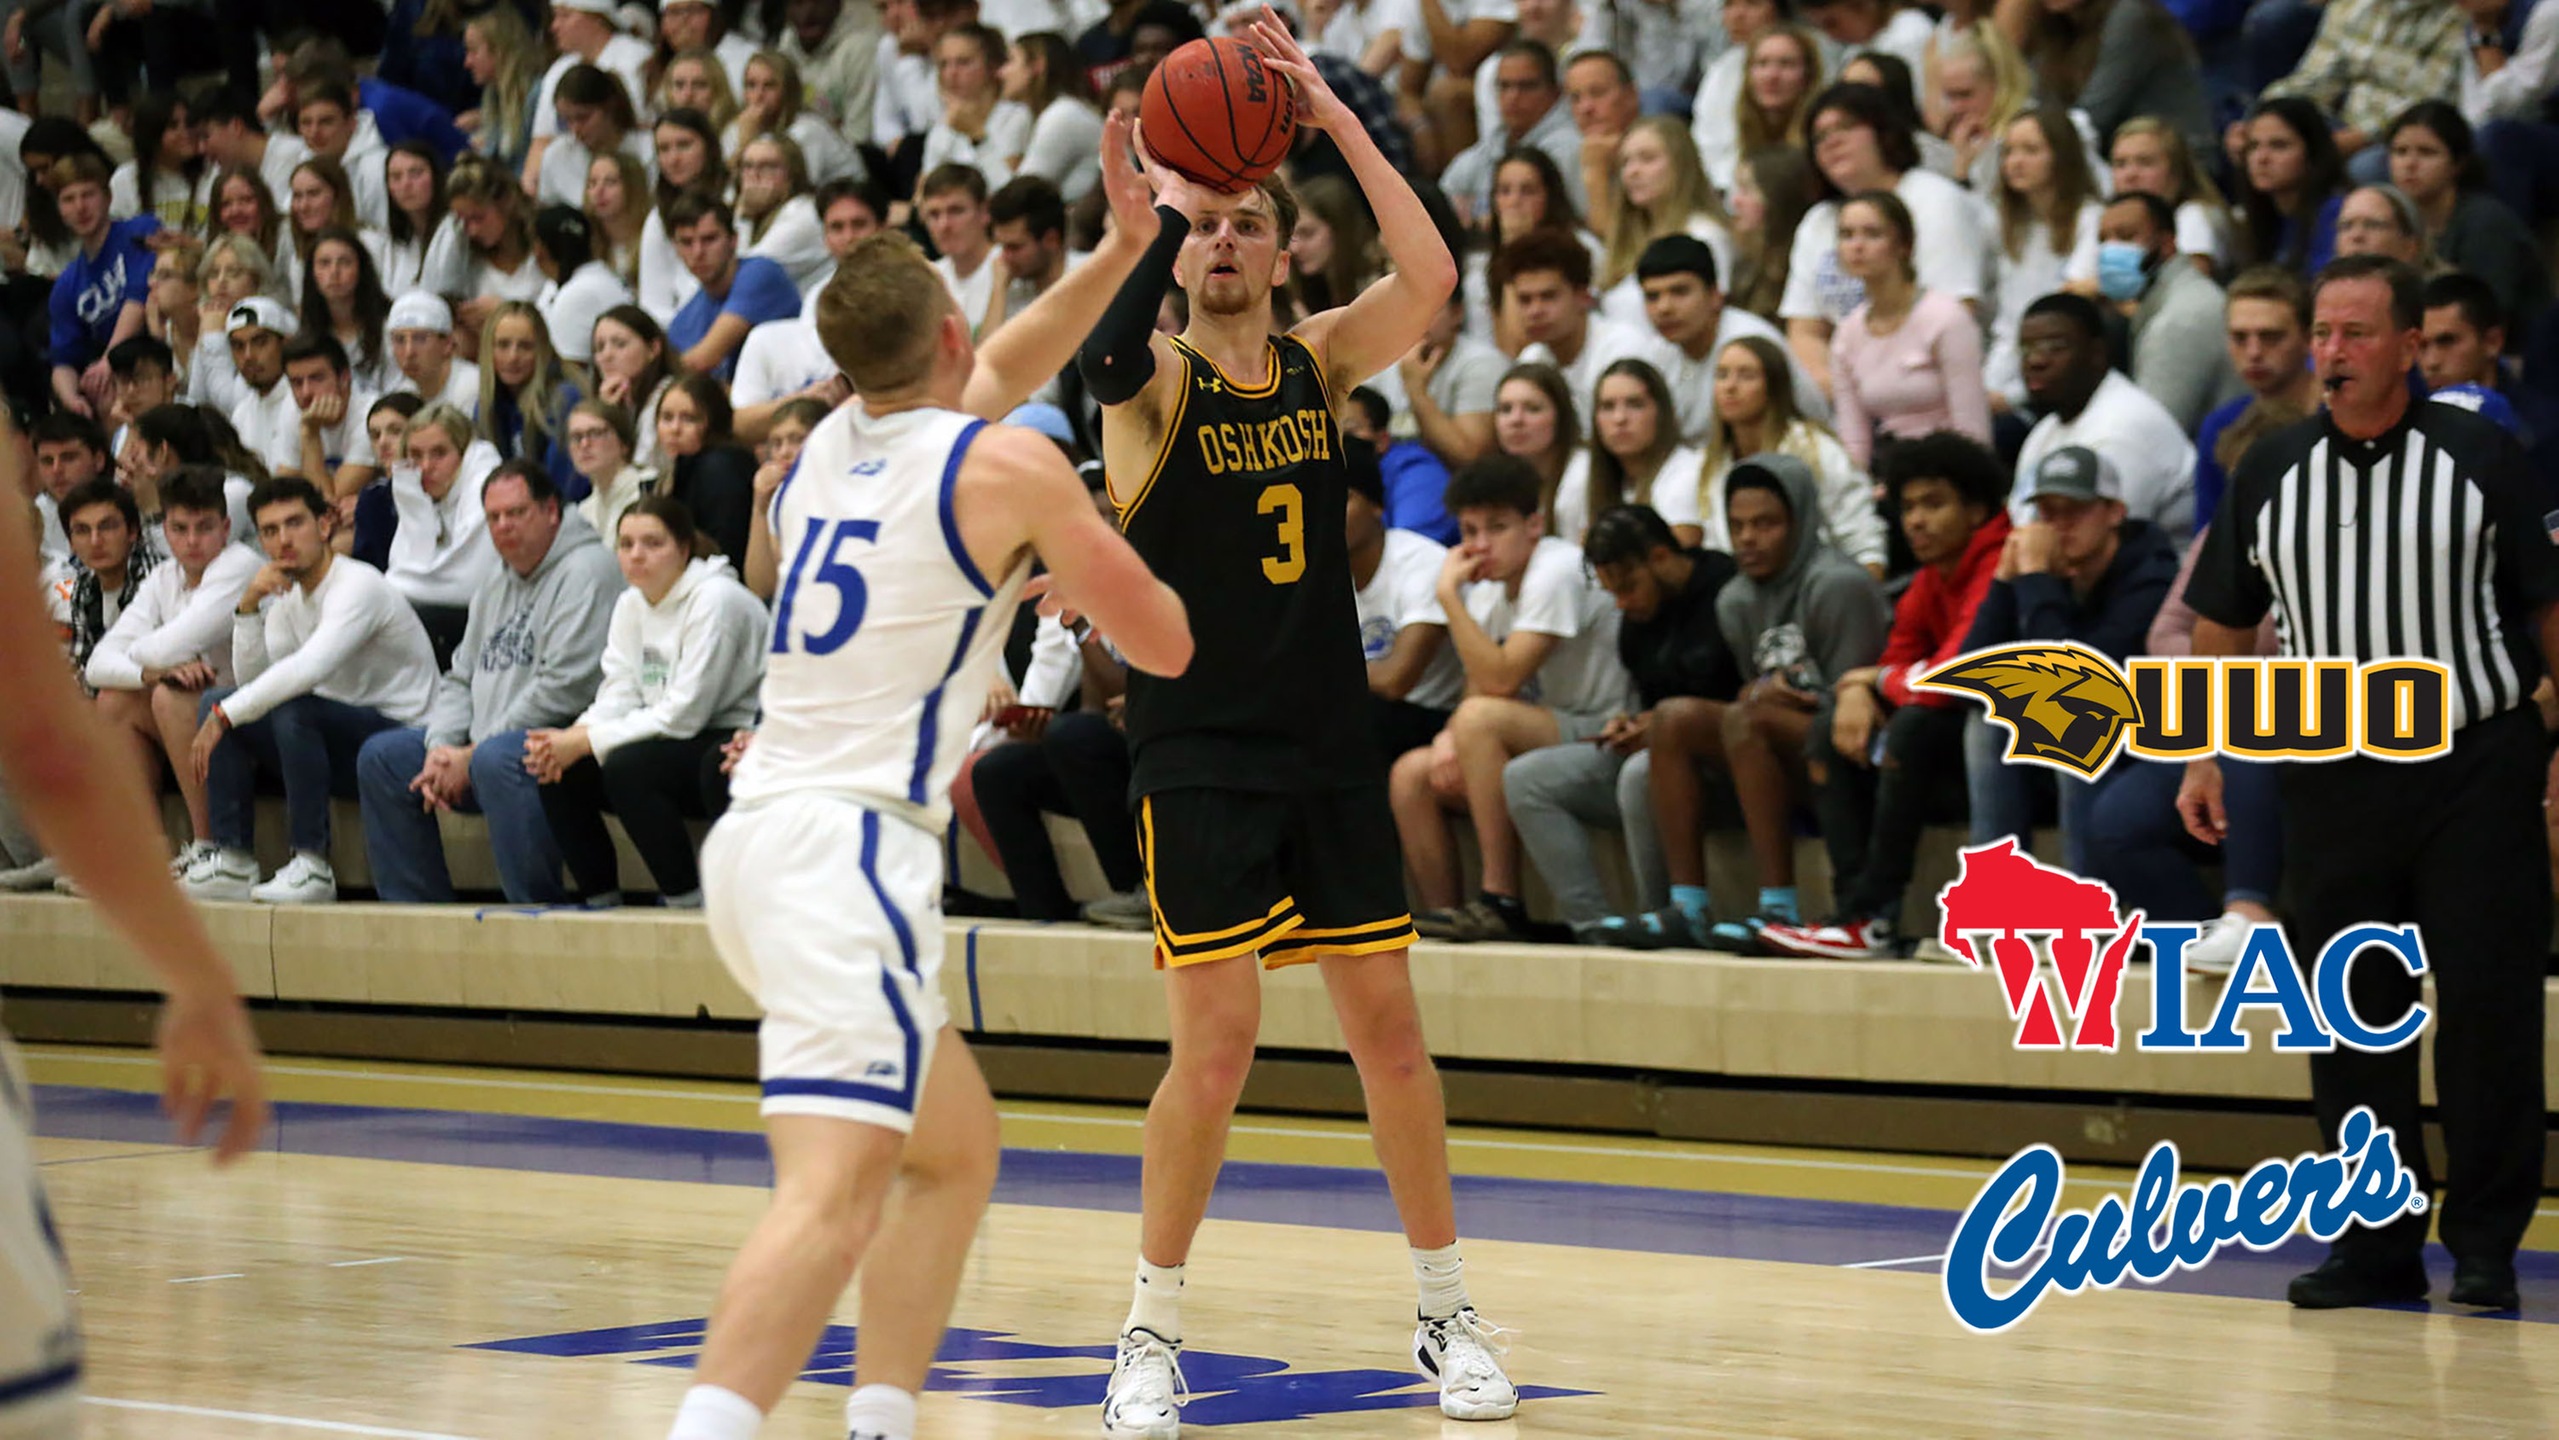 Eddie Muench earned All-WIAC First Team honors in 2021 after averaging 18.9 points and 3.9 rebounds per game.